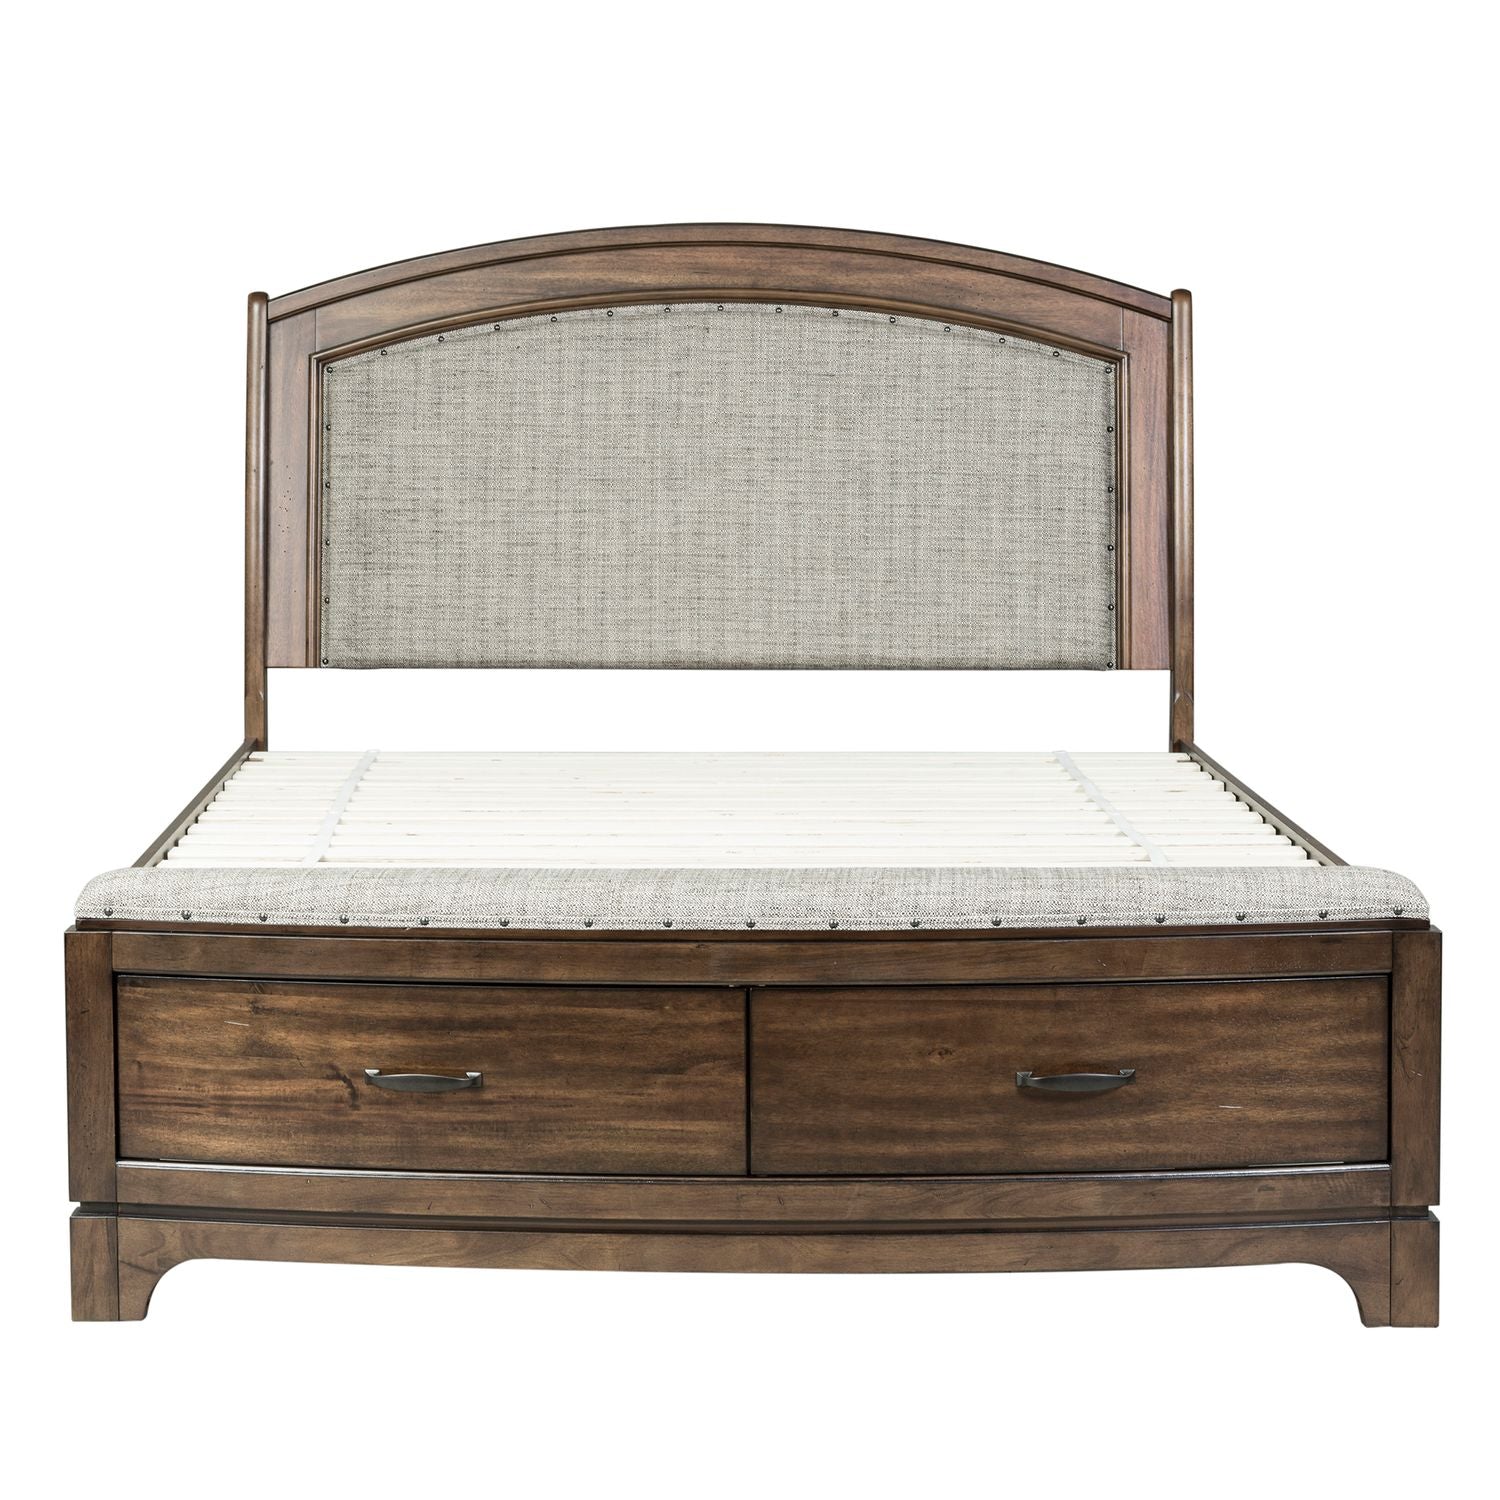 Avalon Bedroom Collection From Liberty Furniture - Pebble Brown Finish